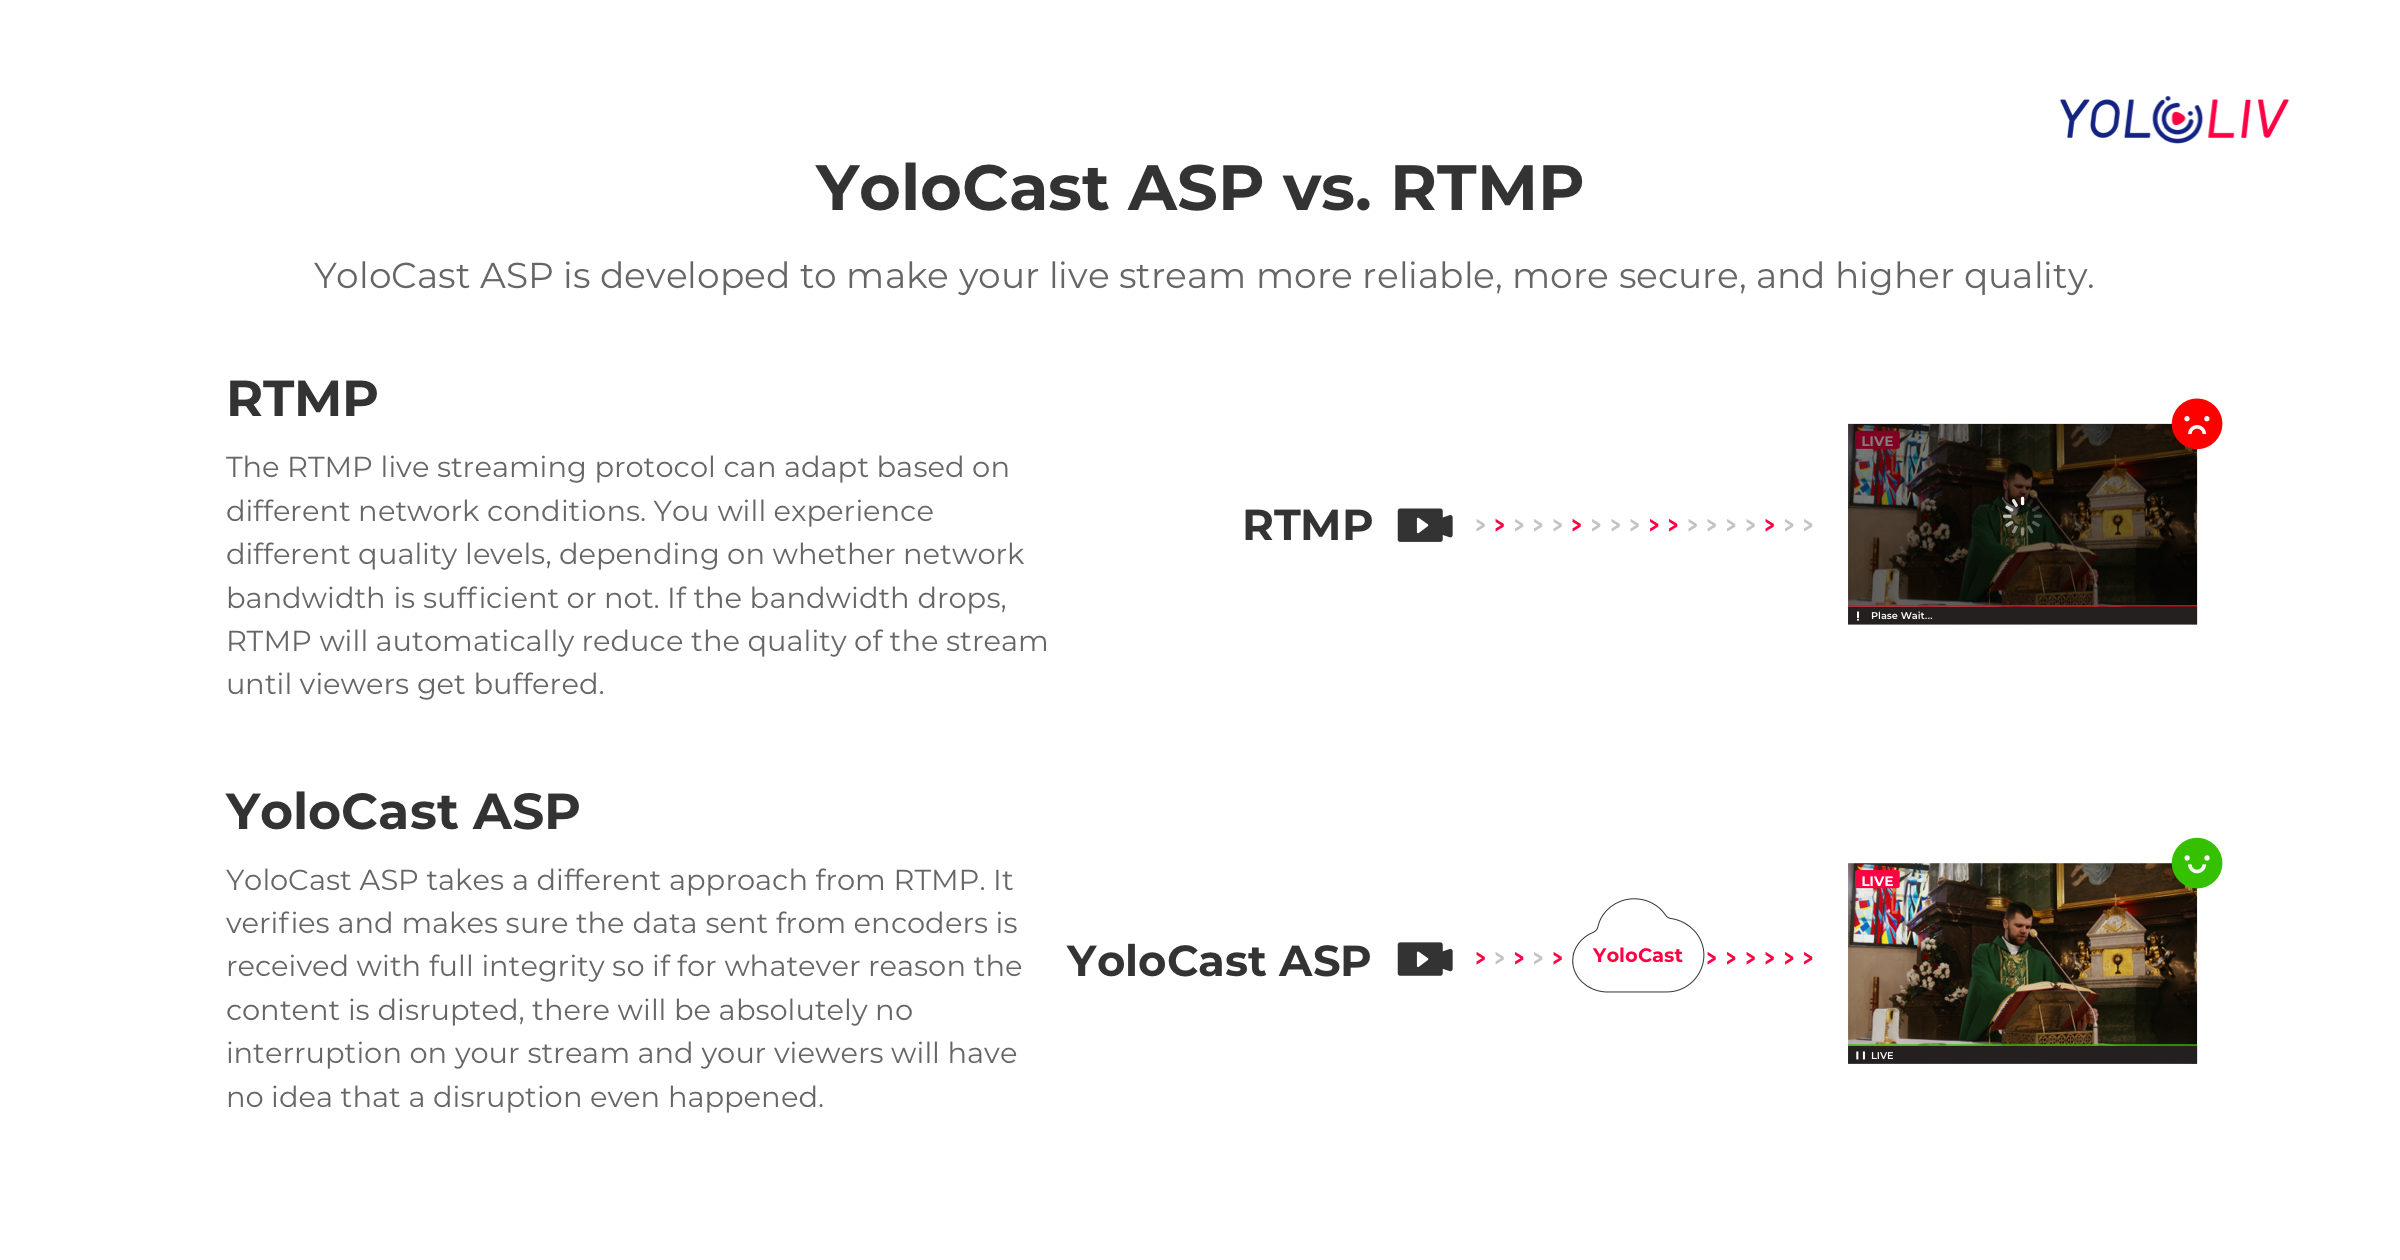 YoloLiv launches Ardent Streaming Protocol to supersede RTMP 9